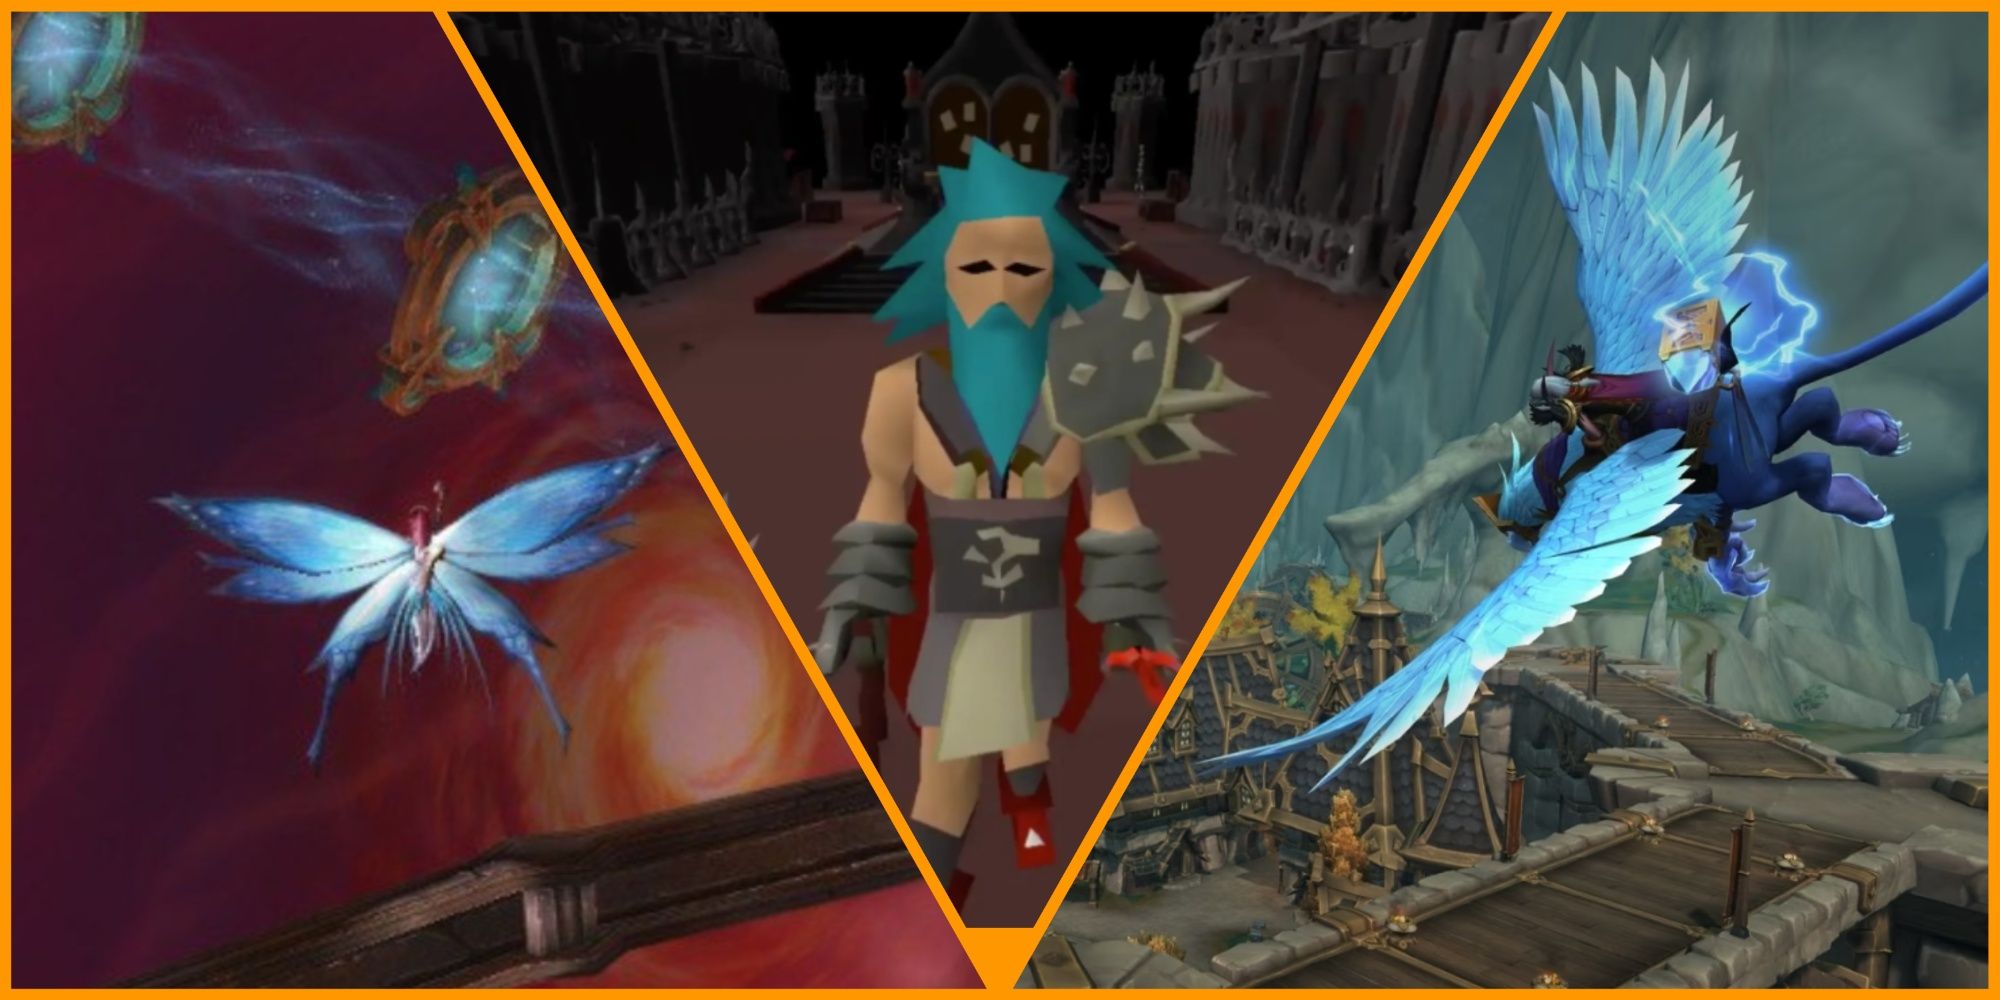 microsoft, android, mmorpg games that have been thriving for more than 10 years